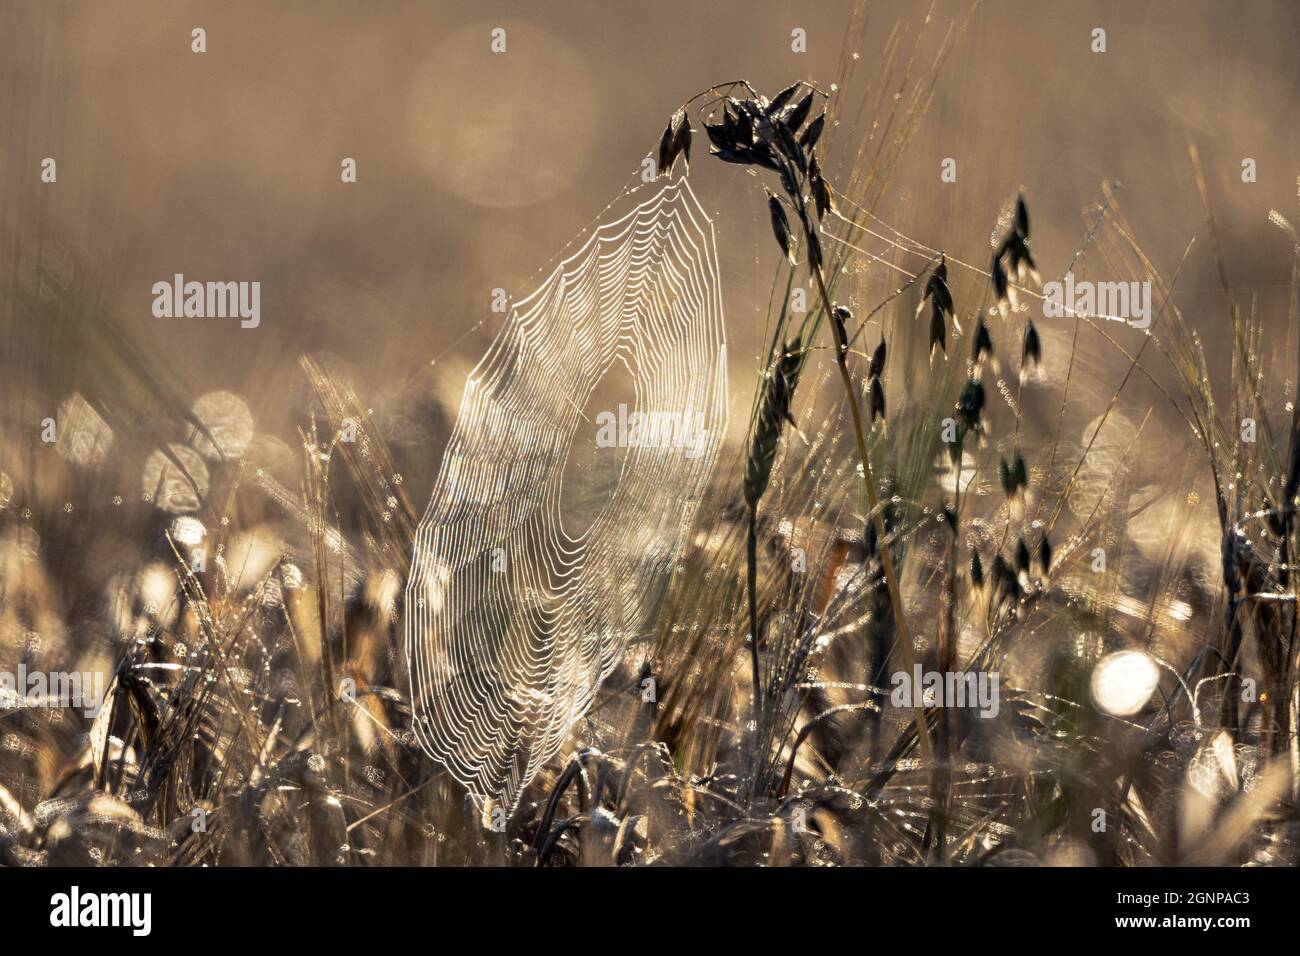 typical orbweavers (Araneinae), spiderweb with morning dew in an oatfield in backlight, Germany, Bavaria Stock Photo